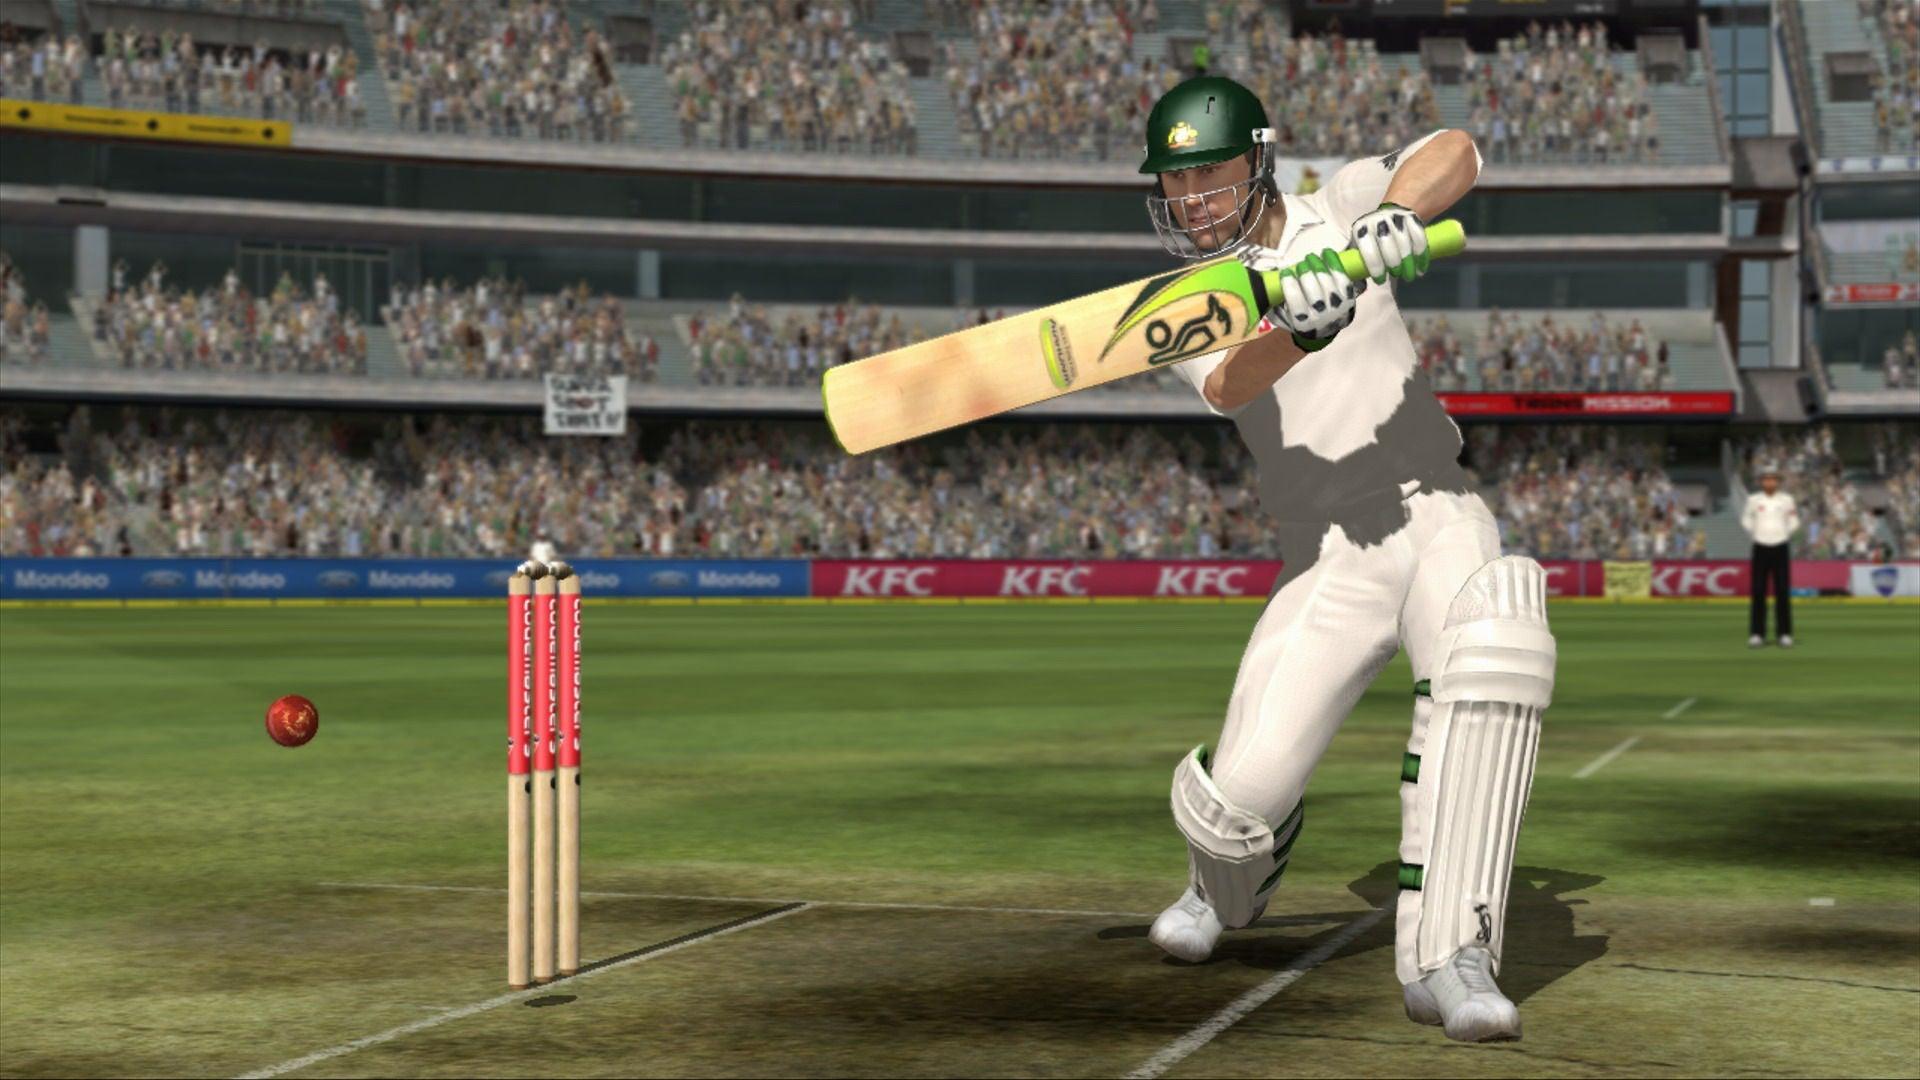 Ashes Cricket 2009 (Wii) (Pre-owned) - GameStore.mt | Powered by Flutisat